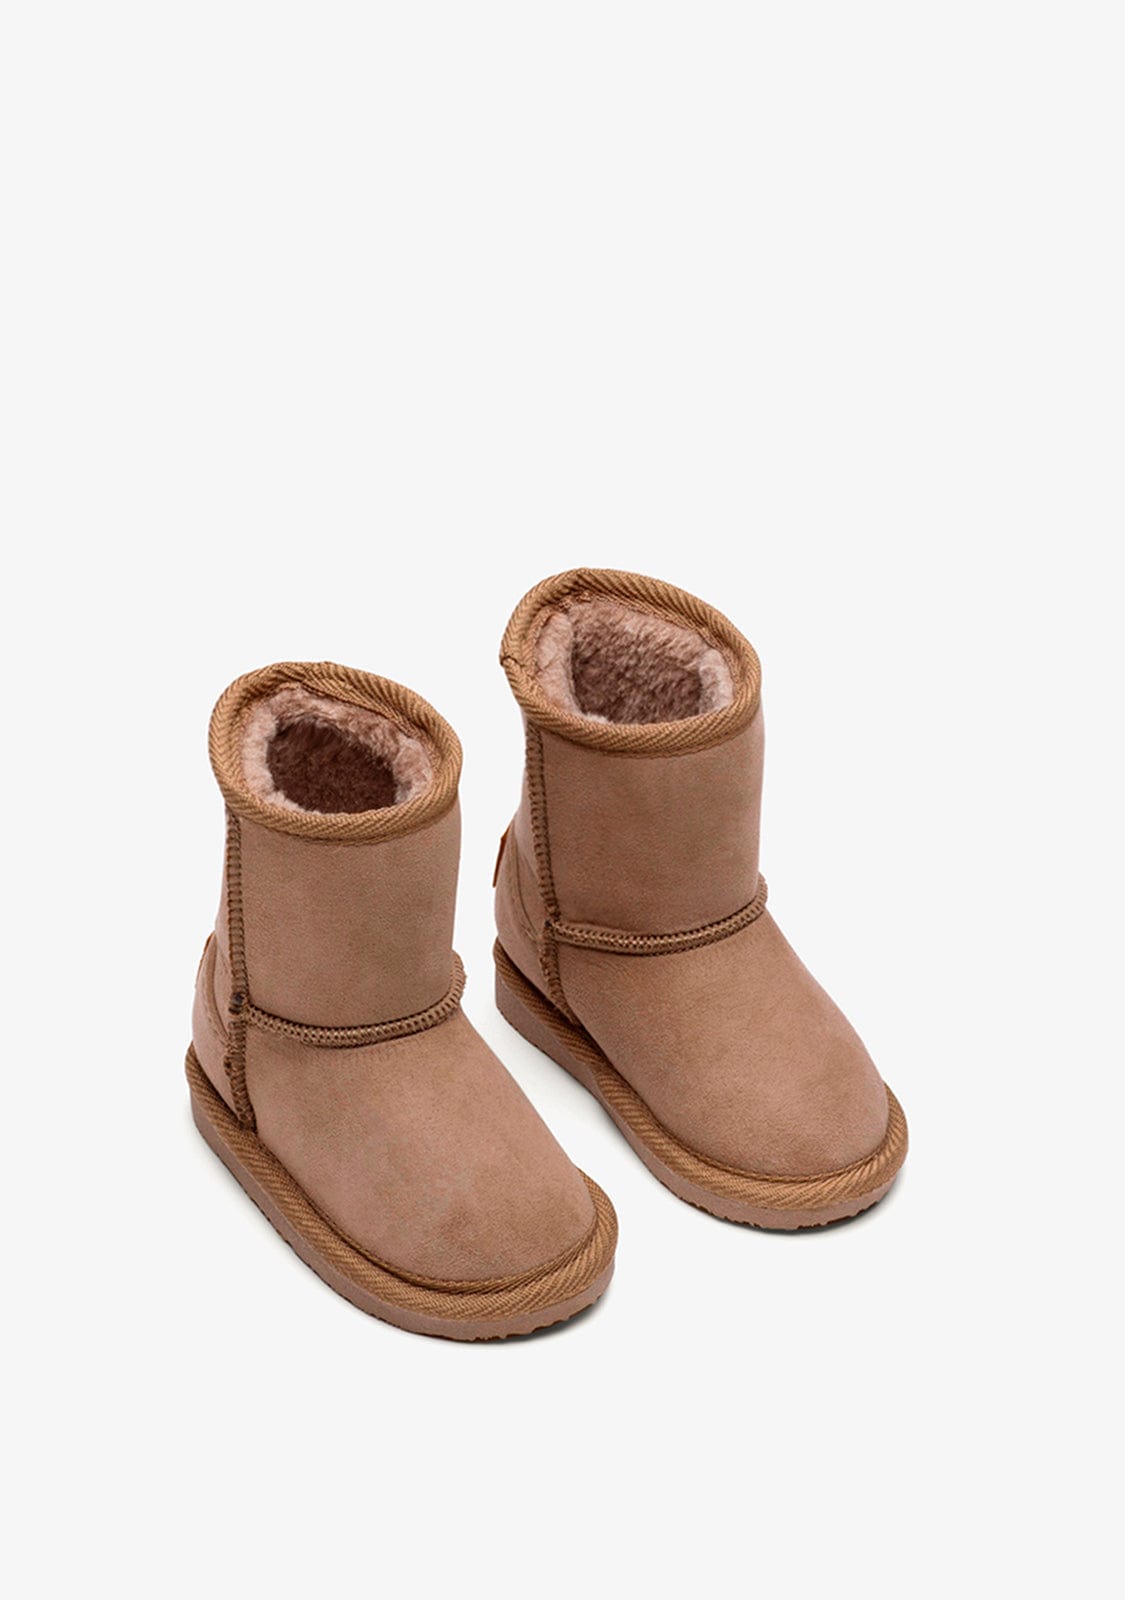 OSITO Shoes Baby's Australian Boots Taupe Water Repellent